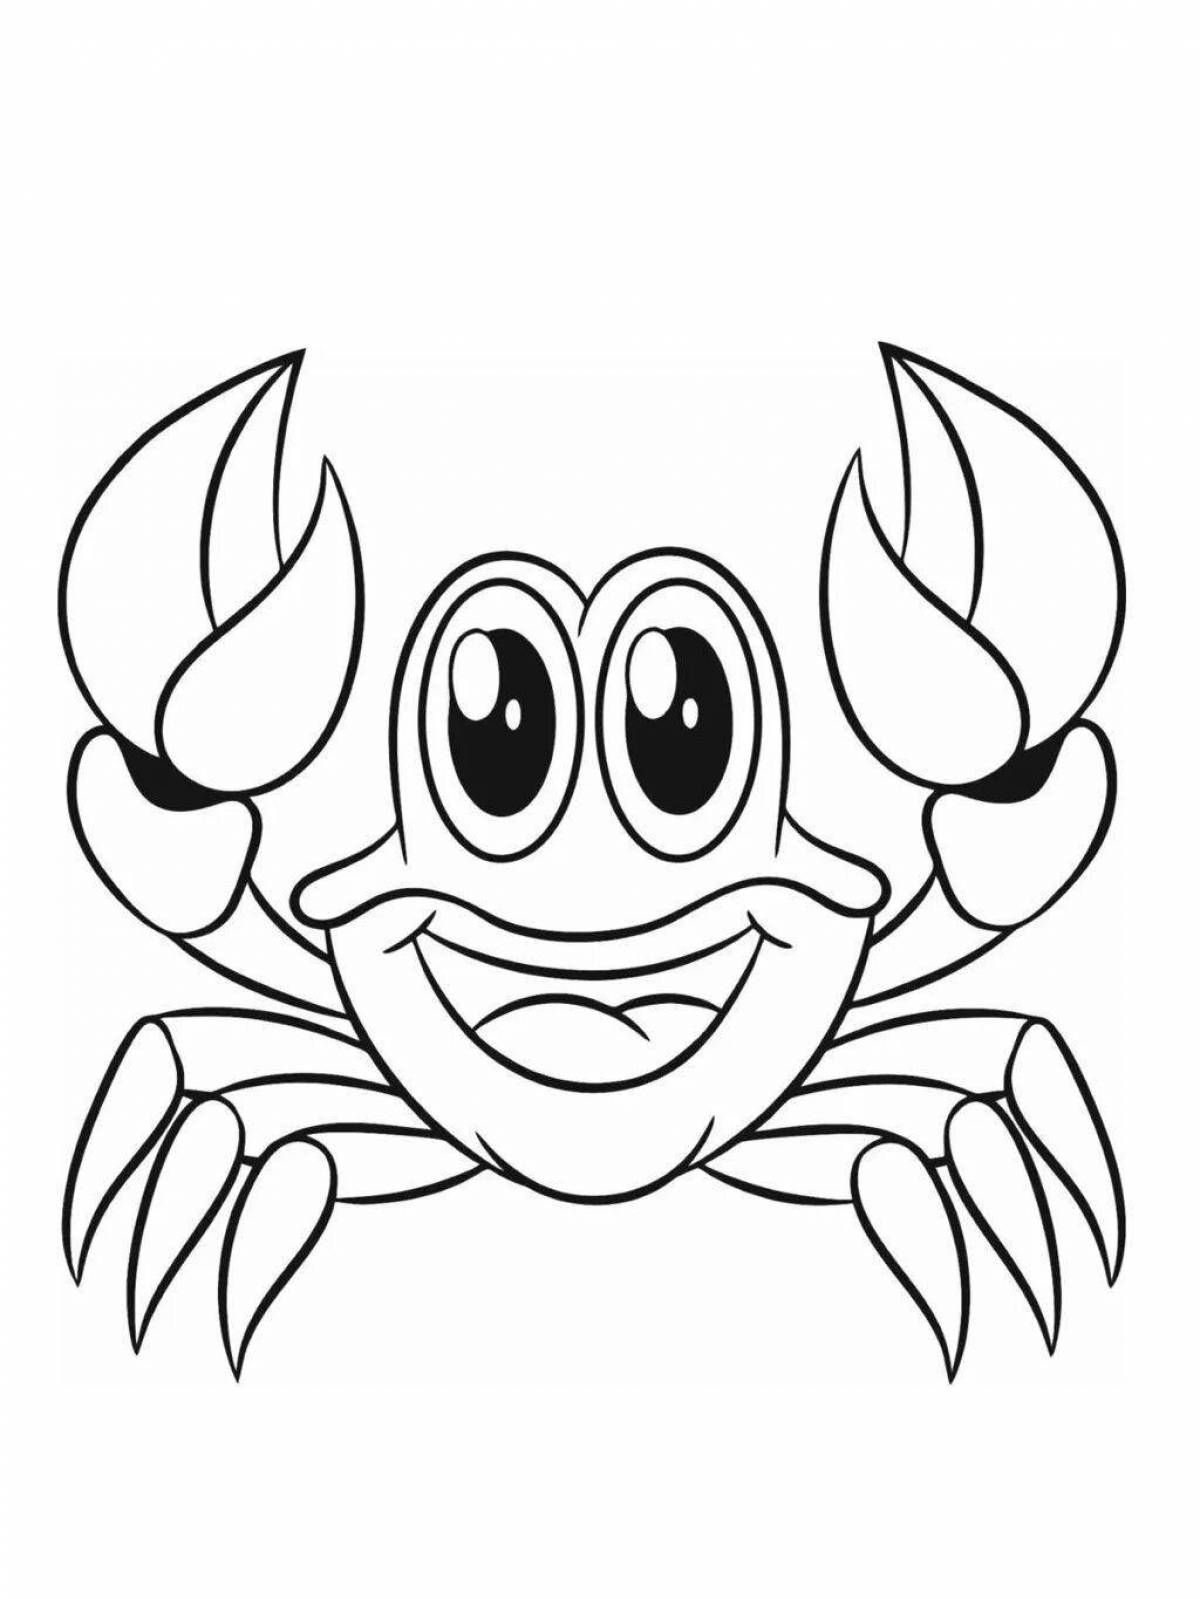 Crab for kids #14